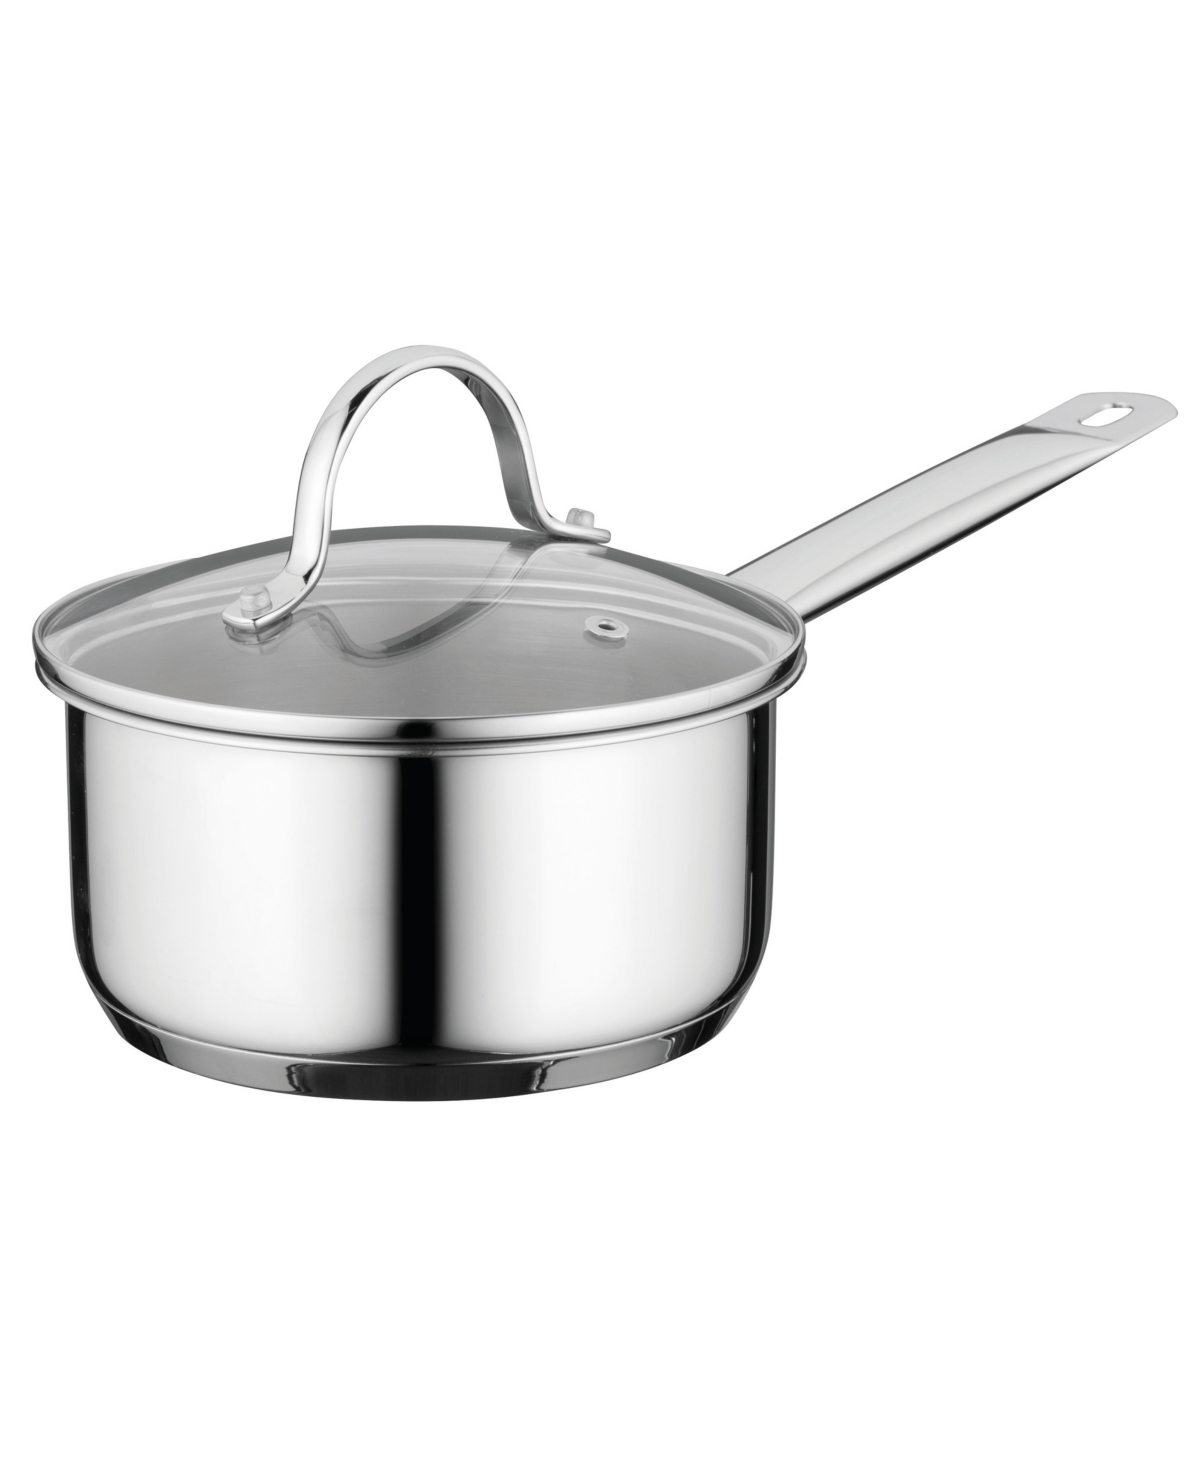 BergHOFF Comfort Stainless Steel 1.7-Qt. Covered Saucepan